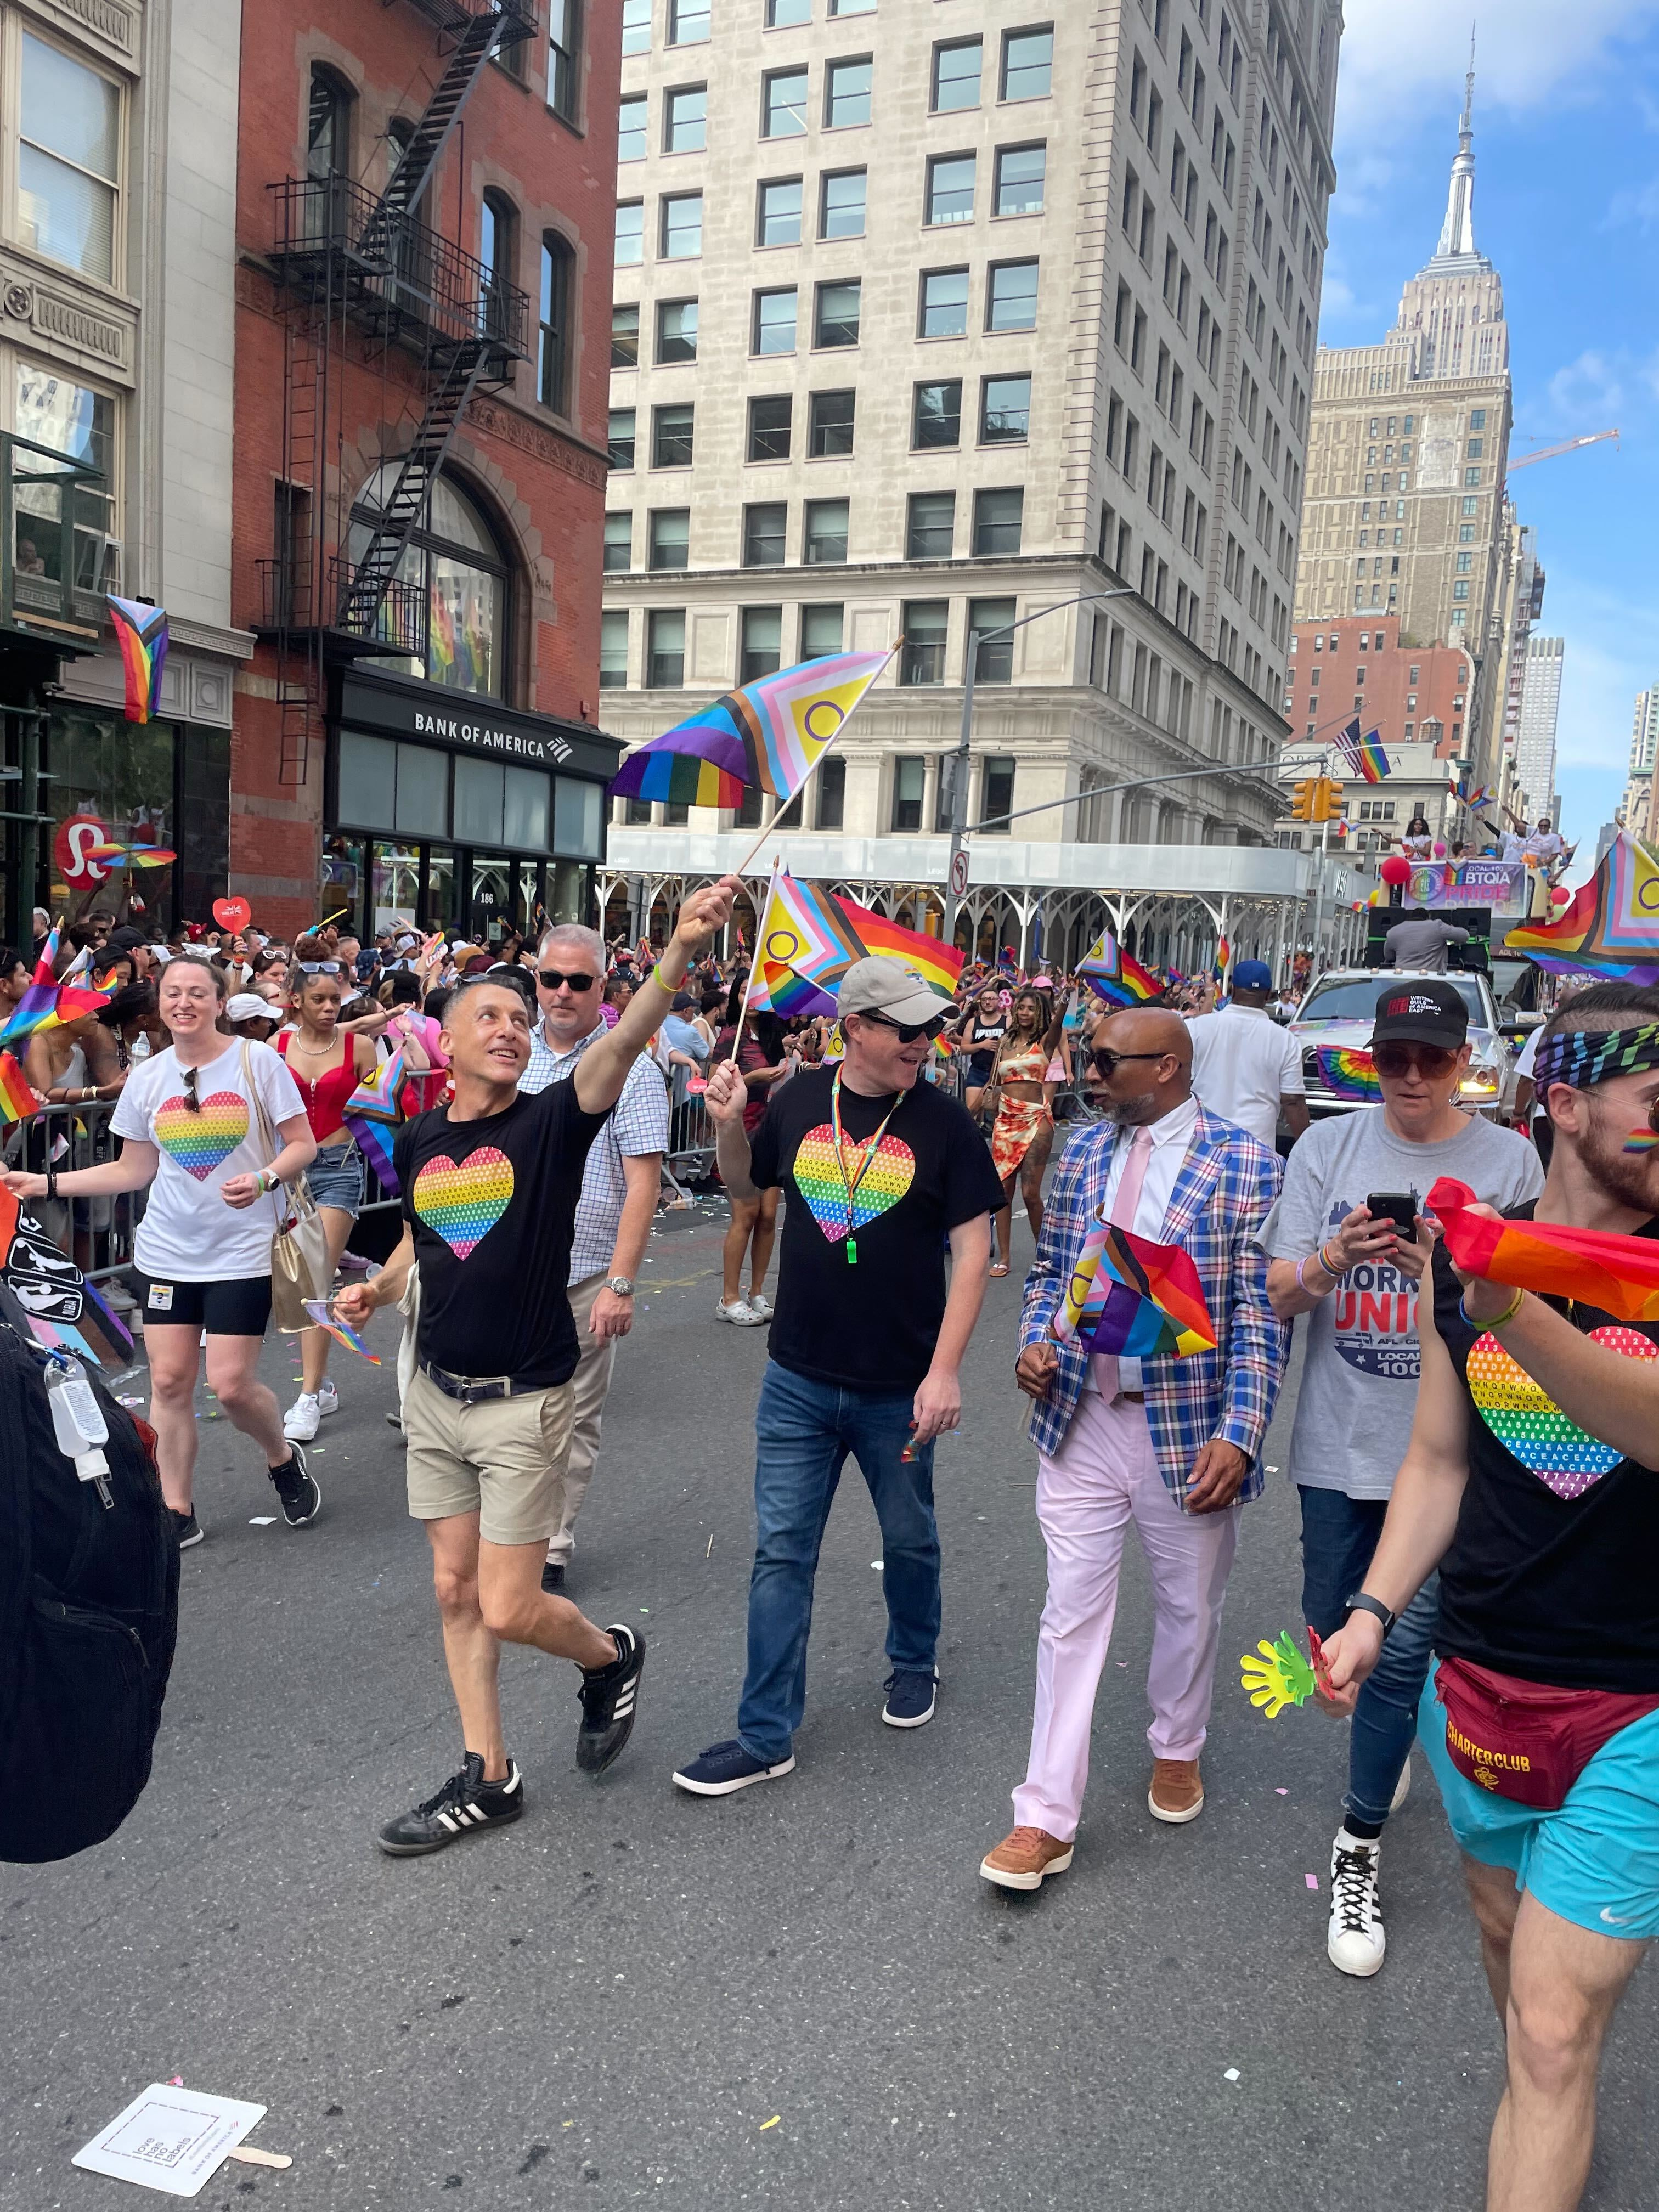 PHOTOS: New York City Transit Celebrates LGBTQ+ Pride Month with Contingent Marching in Annual Parade